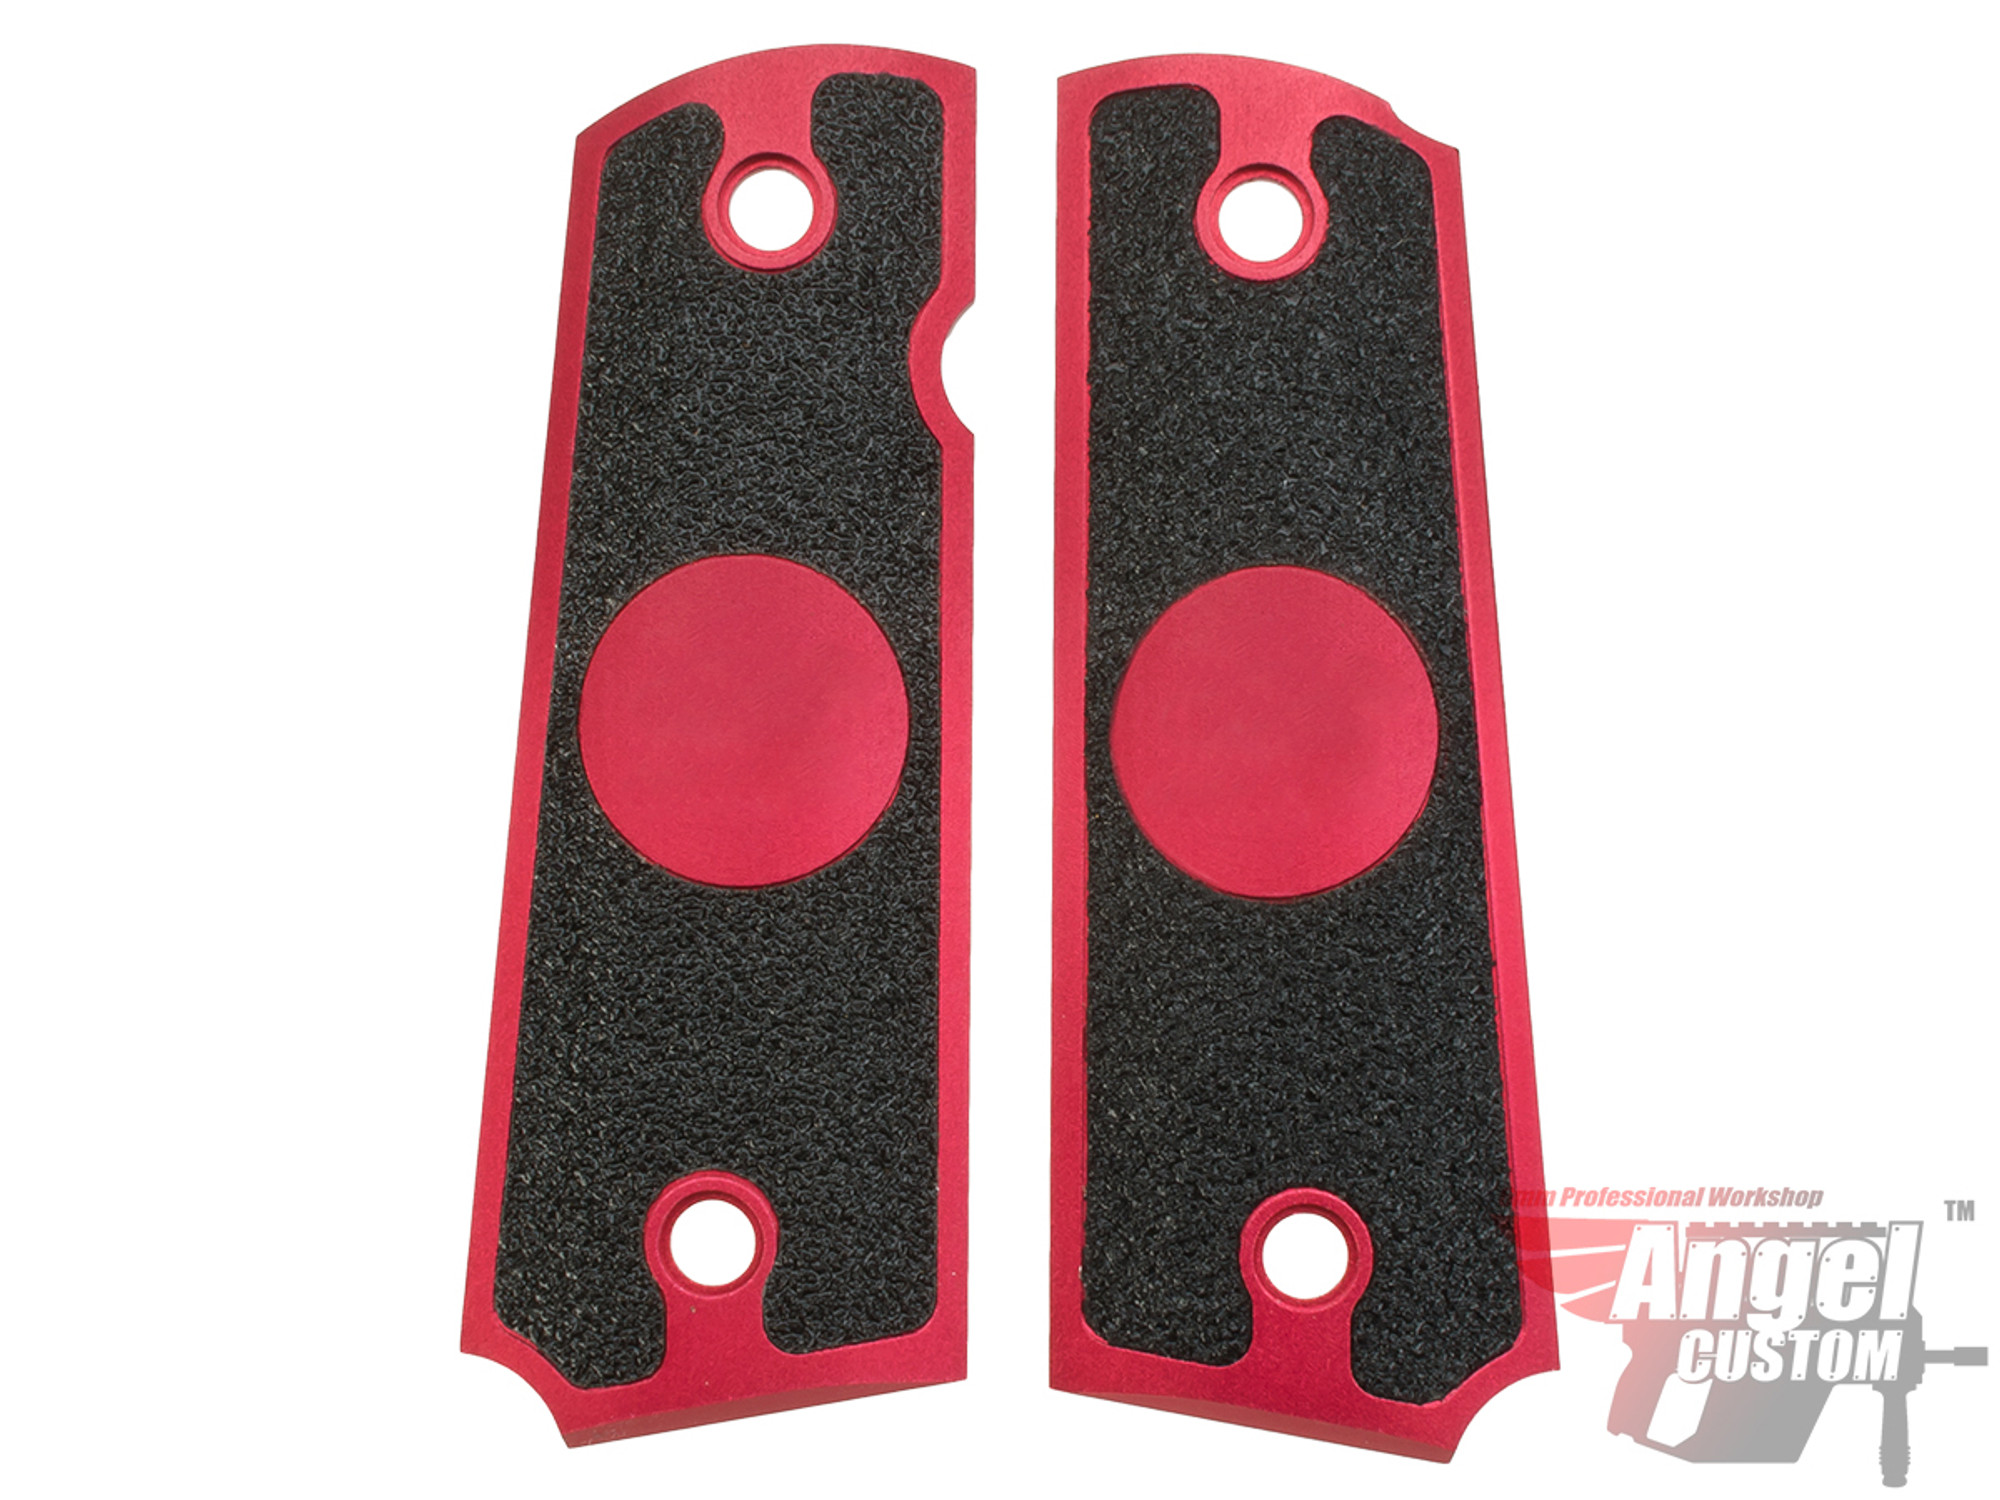 Angel Custom CNC Machined Tac-Glove "Zodiac" Grips for Tokyo Marui/KWA/Western Arms 1911 Series Airsoft Pistols - Red (Sign: Aquarius)